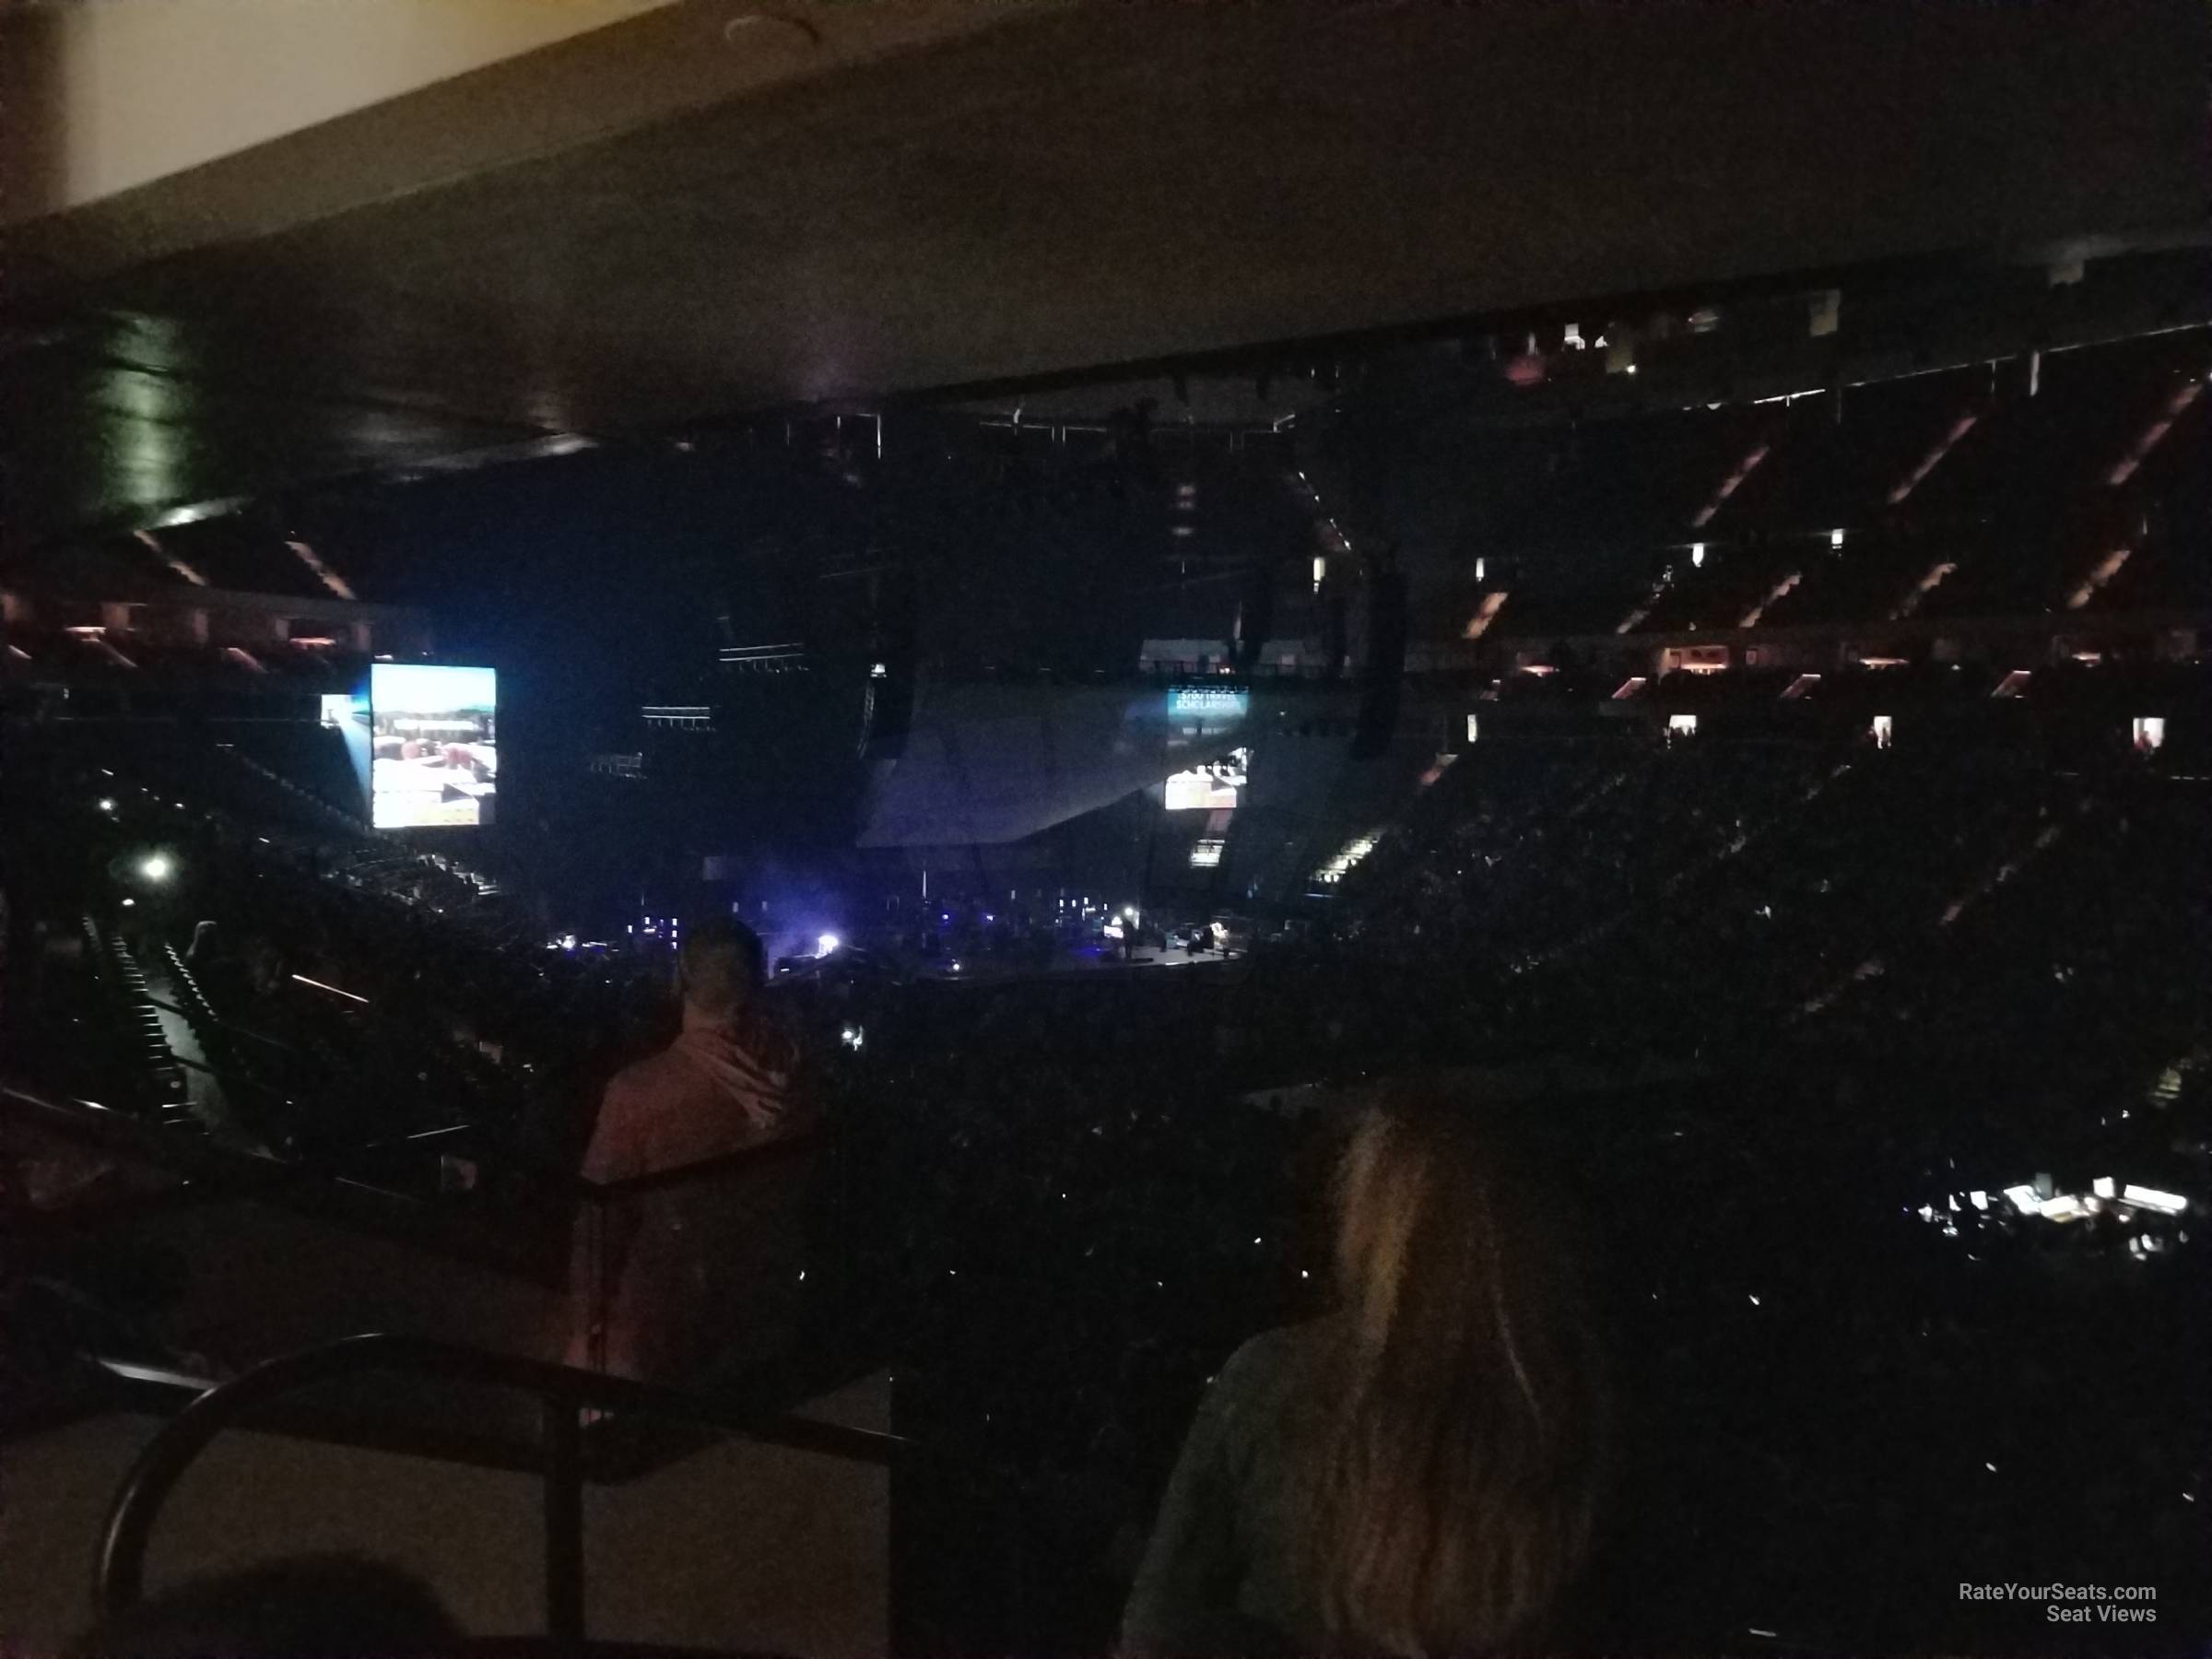 section 113, row 26 seat view  for concert - xcel energy center